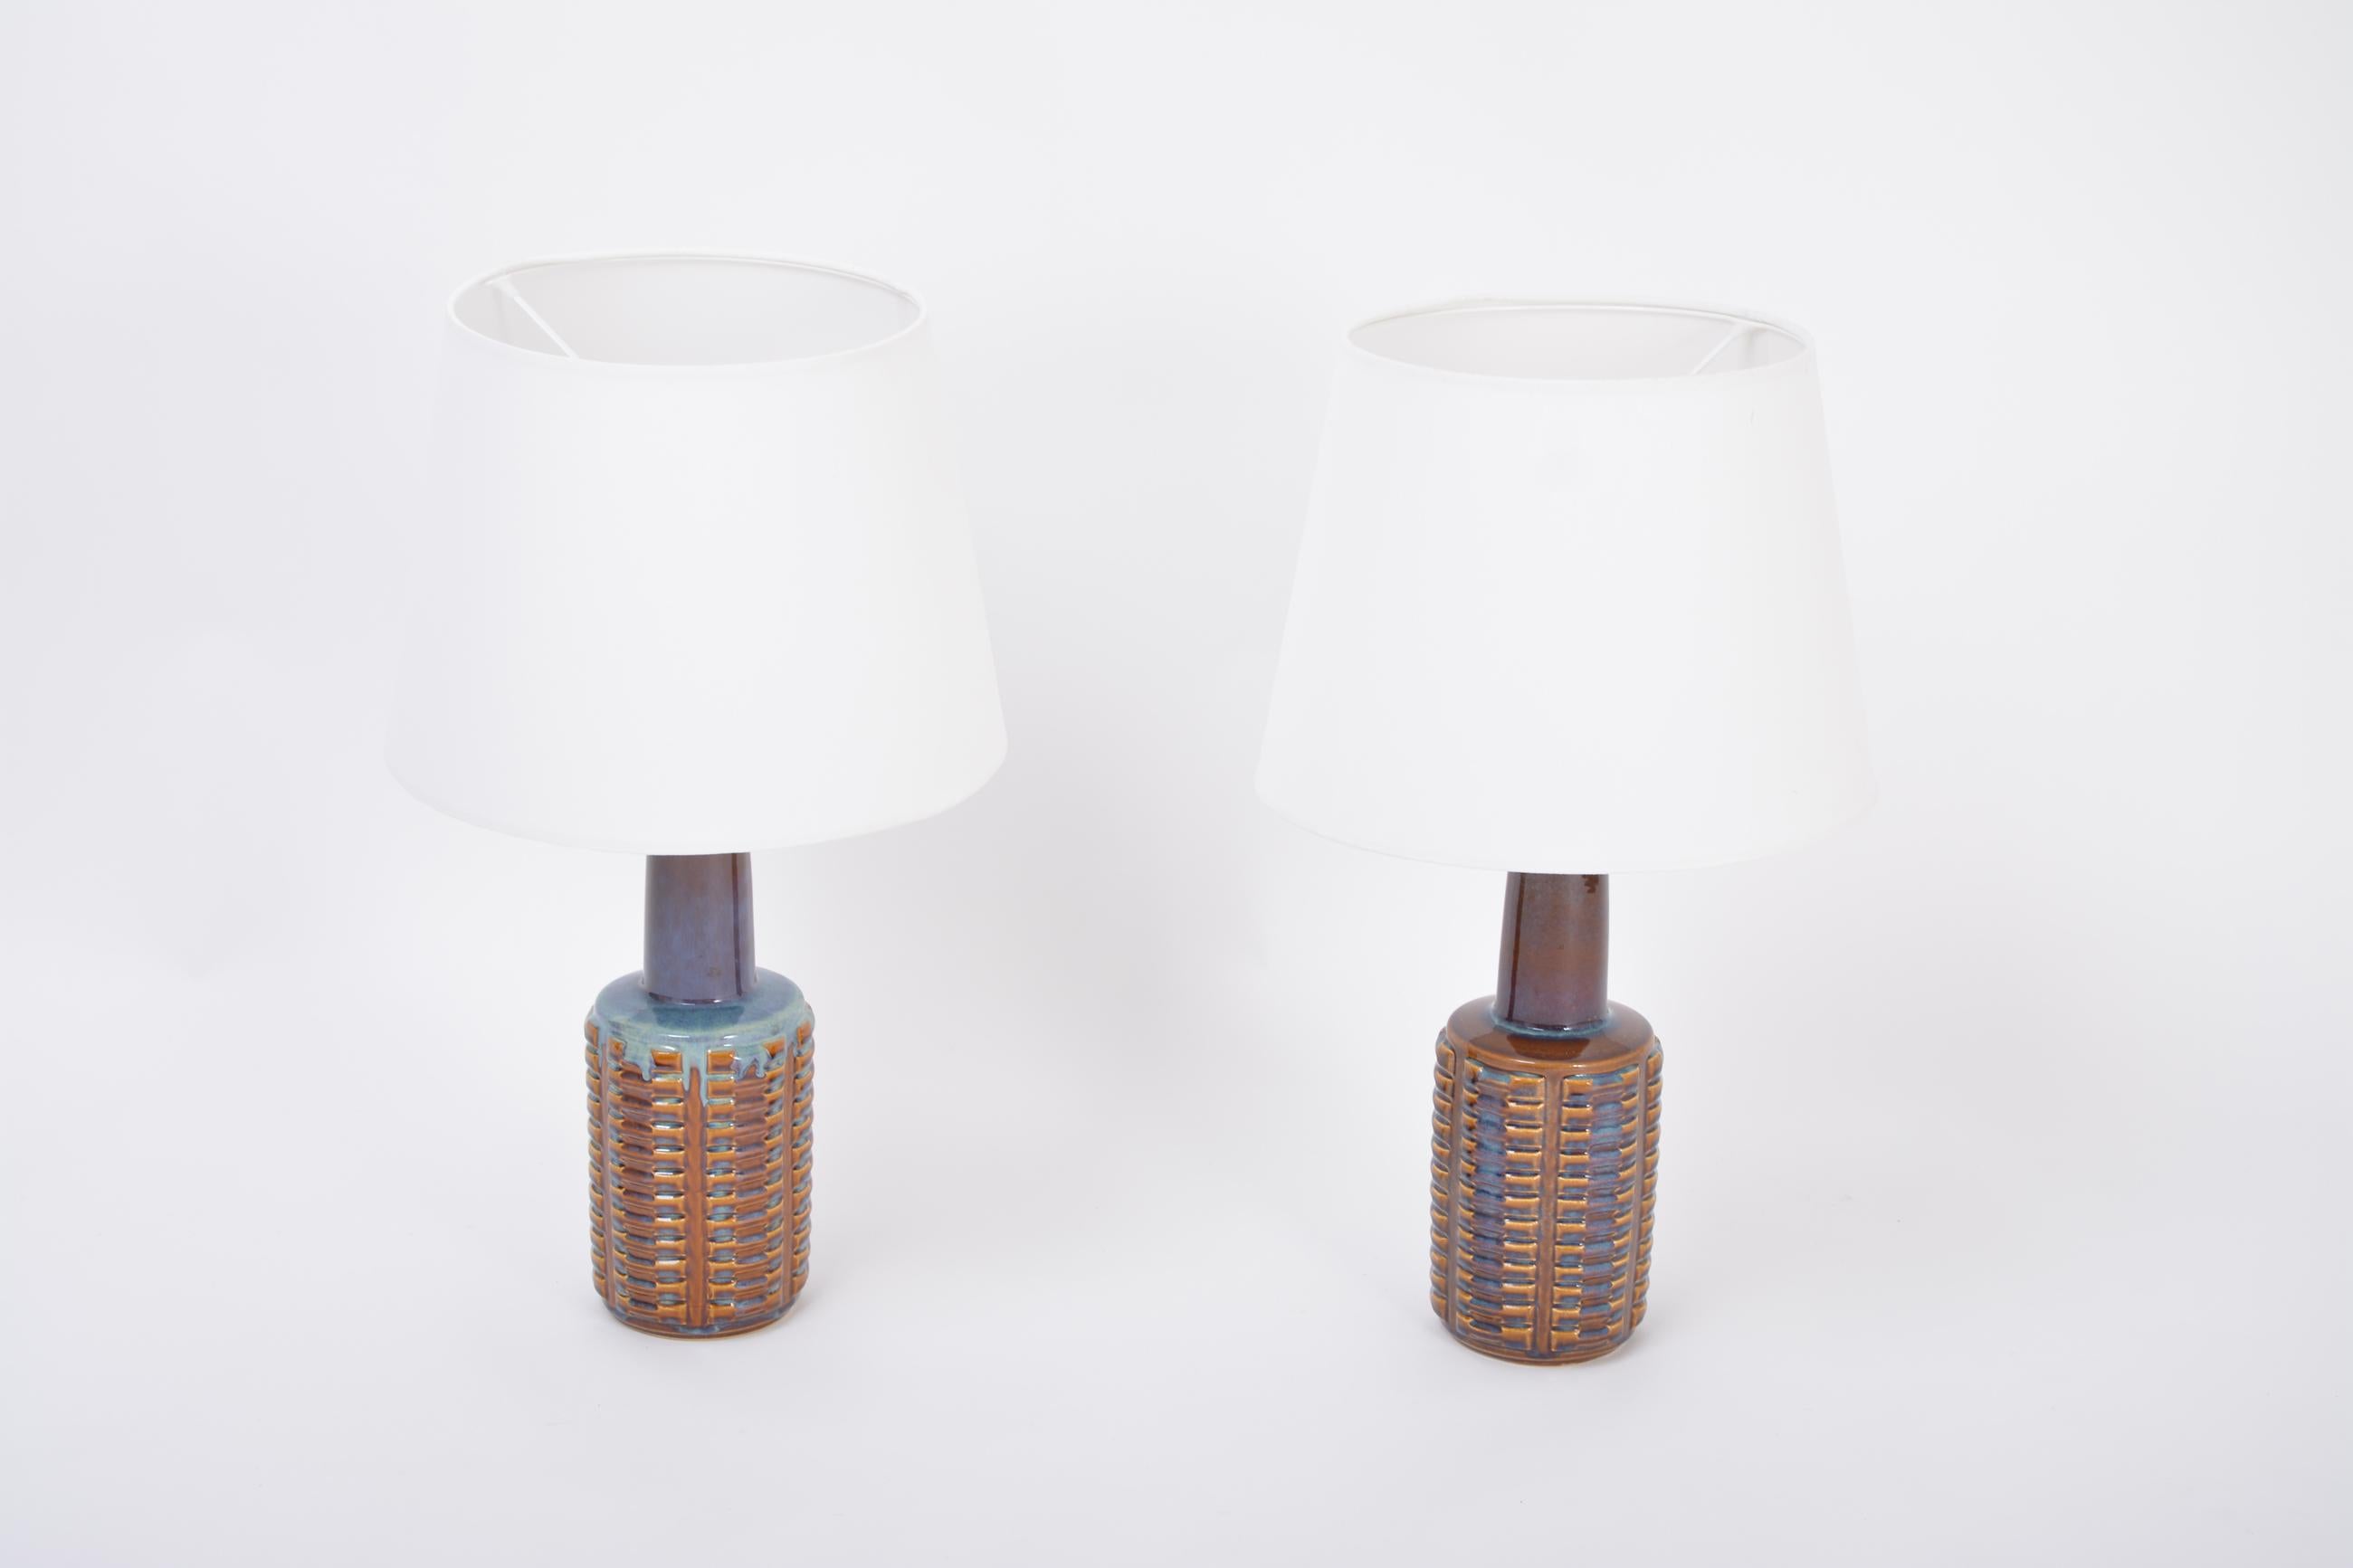 Pair of Tall Mid-Century Modern Ceramic Table Lamps by Einar Johansen for Soholm
This pair of ceramic table lamps was designed by Einar Johansen and produced by Soholm Stentoj in Denmark in the 1960s. The lamps have been rewired with switches and